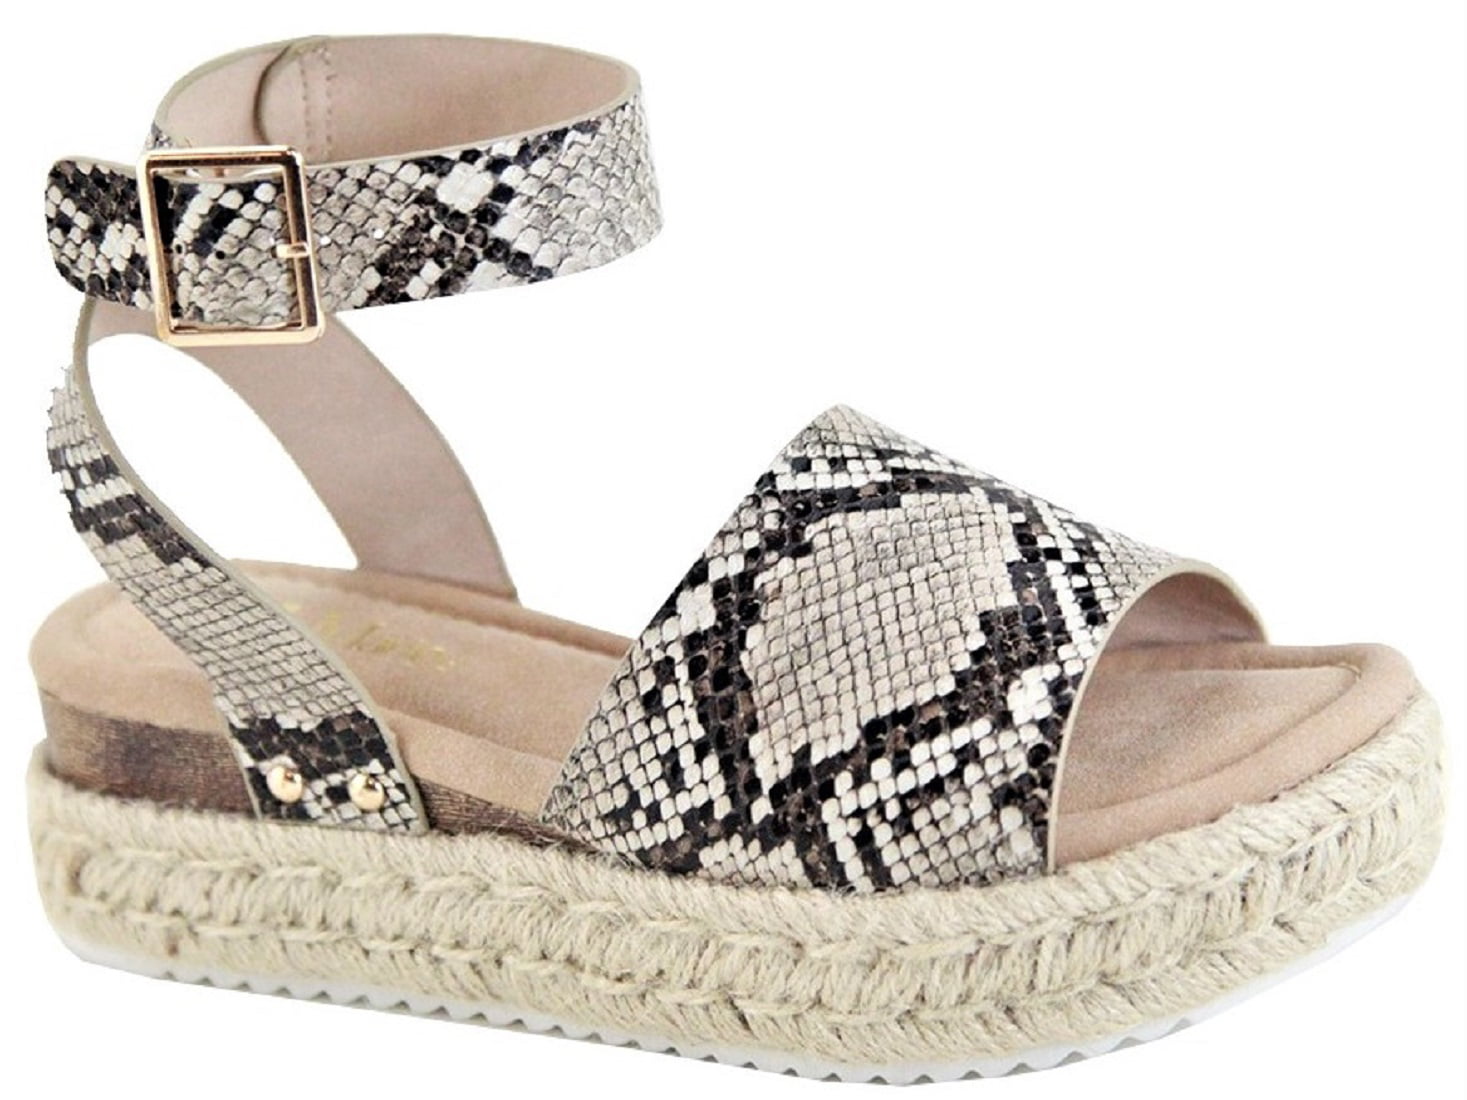 Snake Print Wrap Round Canvas Wedged Plat fWedges Flatforms Strappy Sandals Size